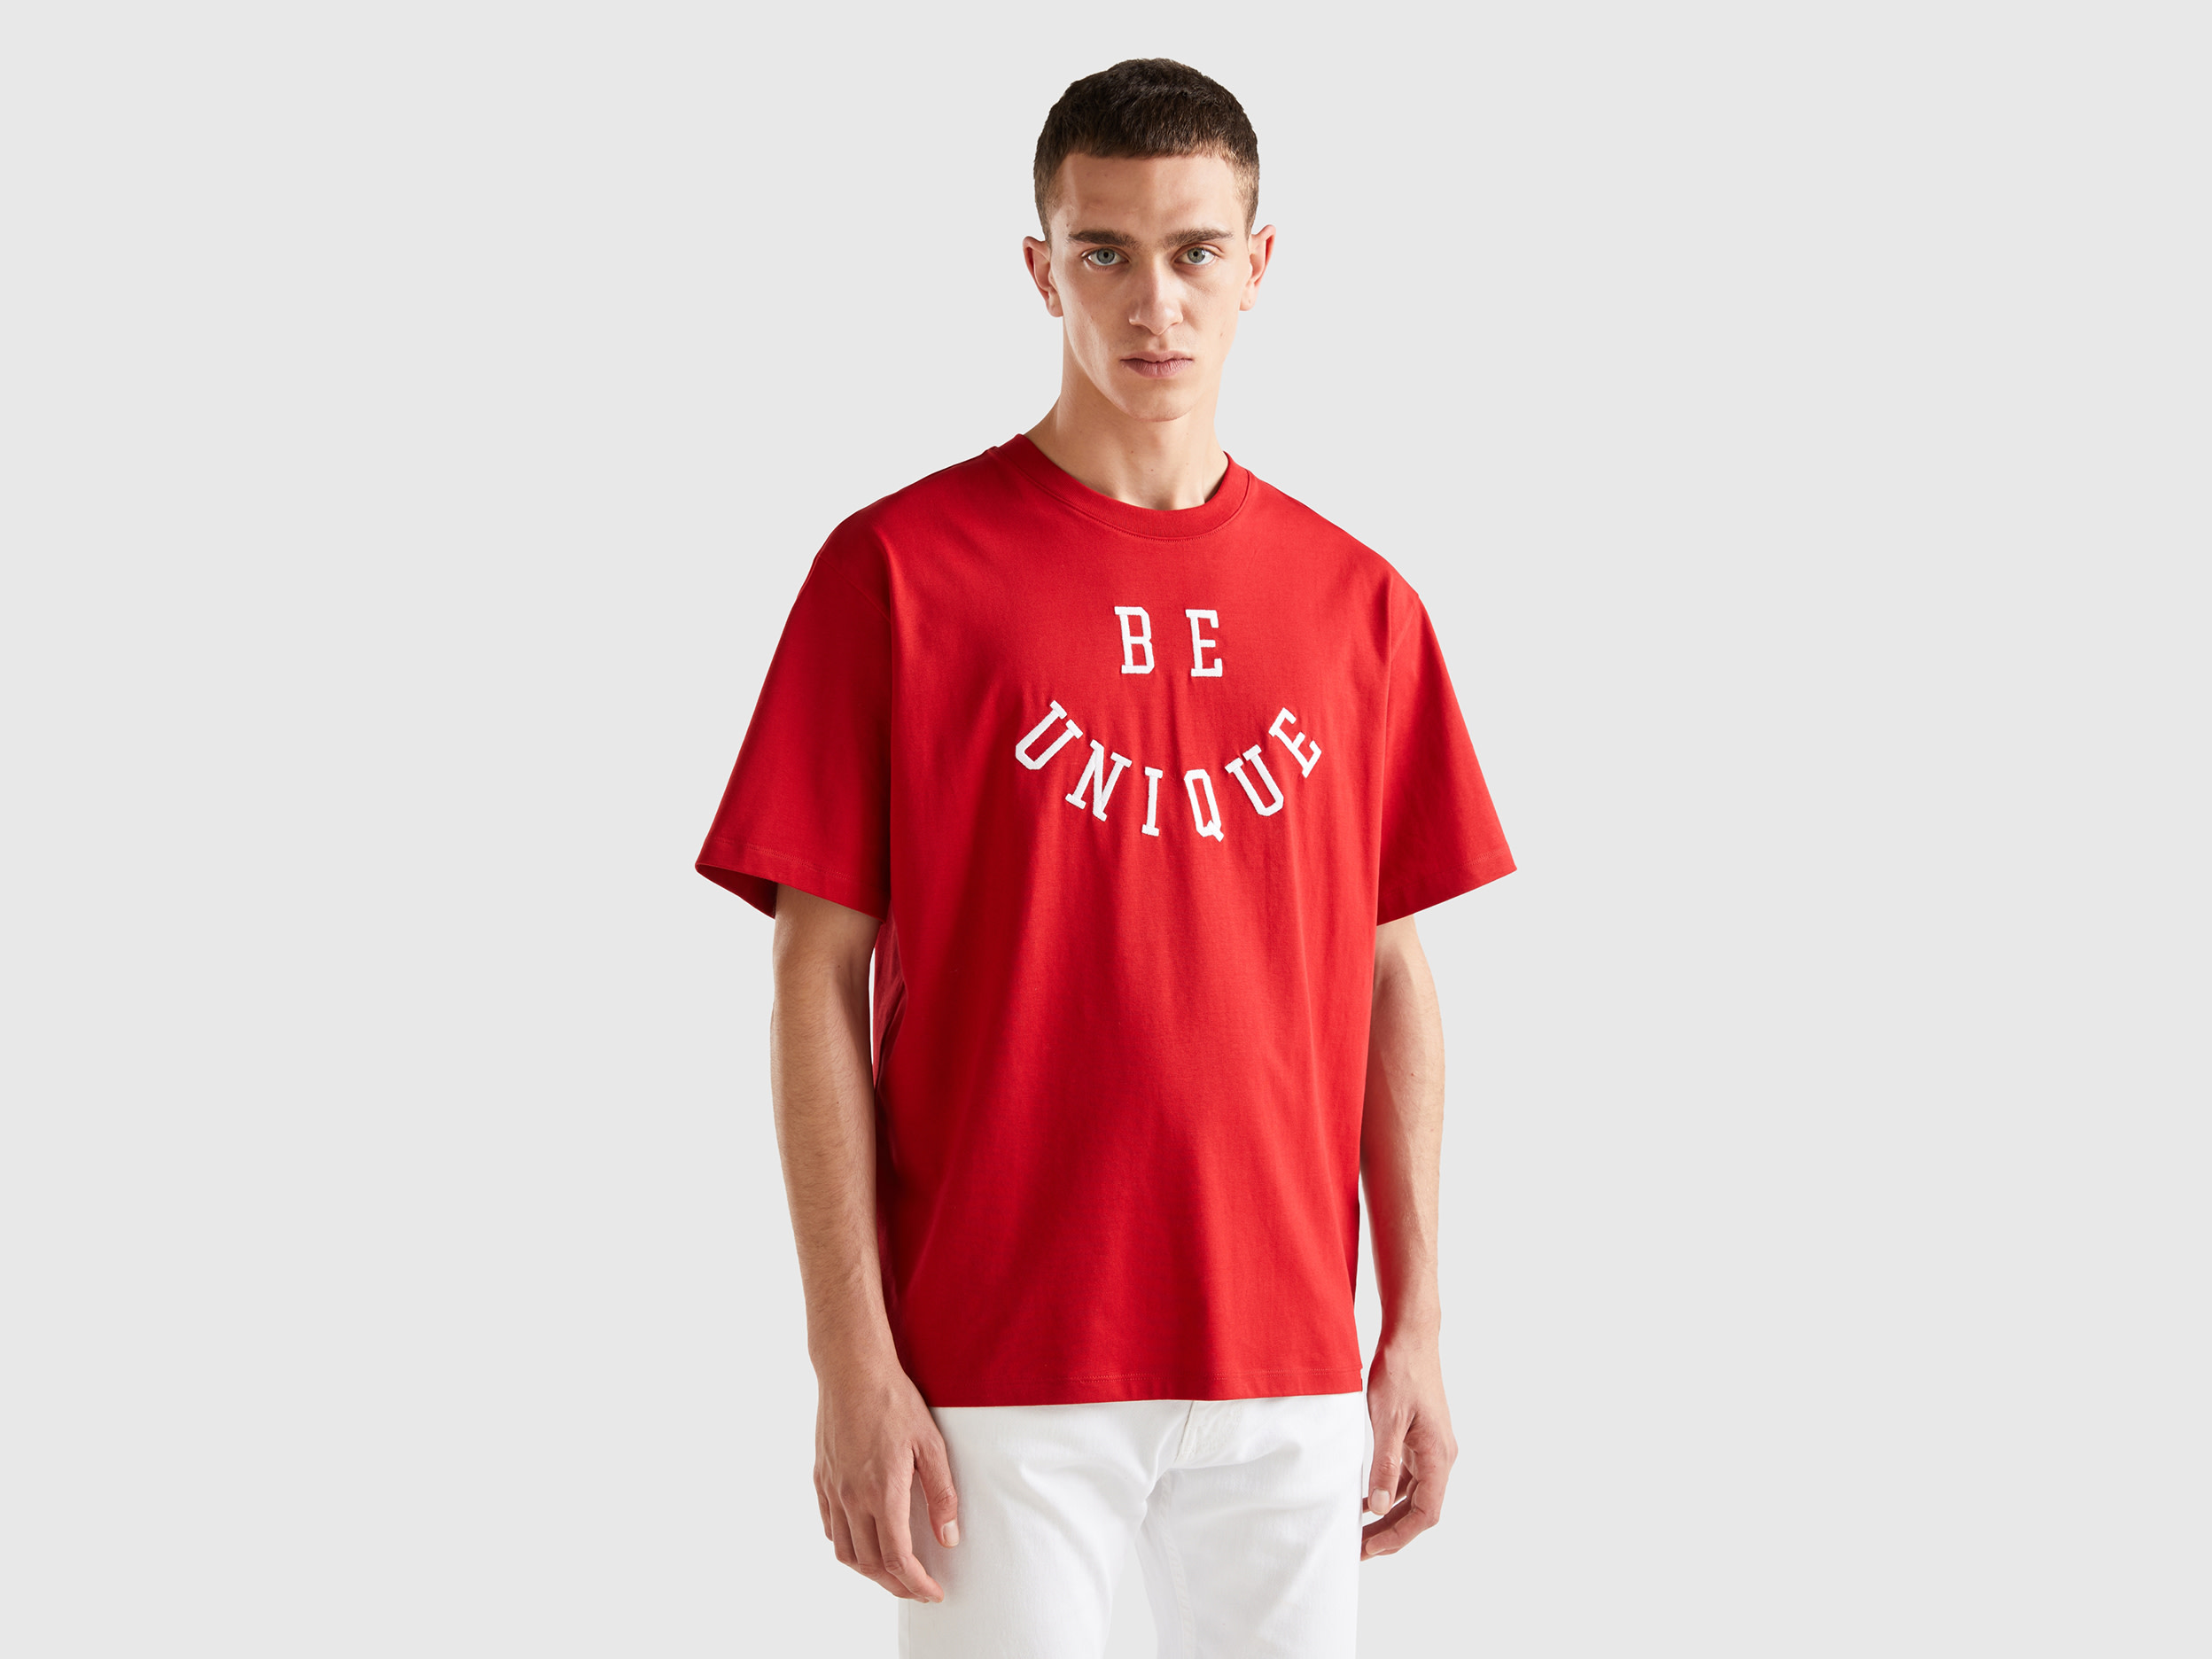 Benetton, T-shirt With Slogan Print, size L, Red, Men